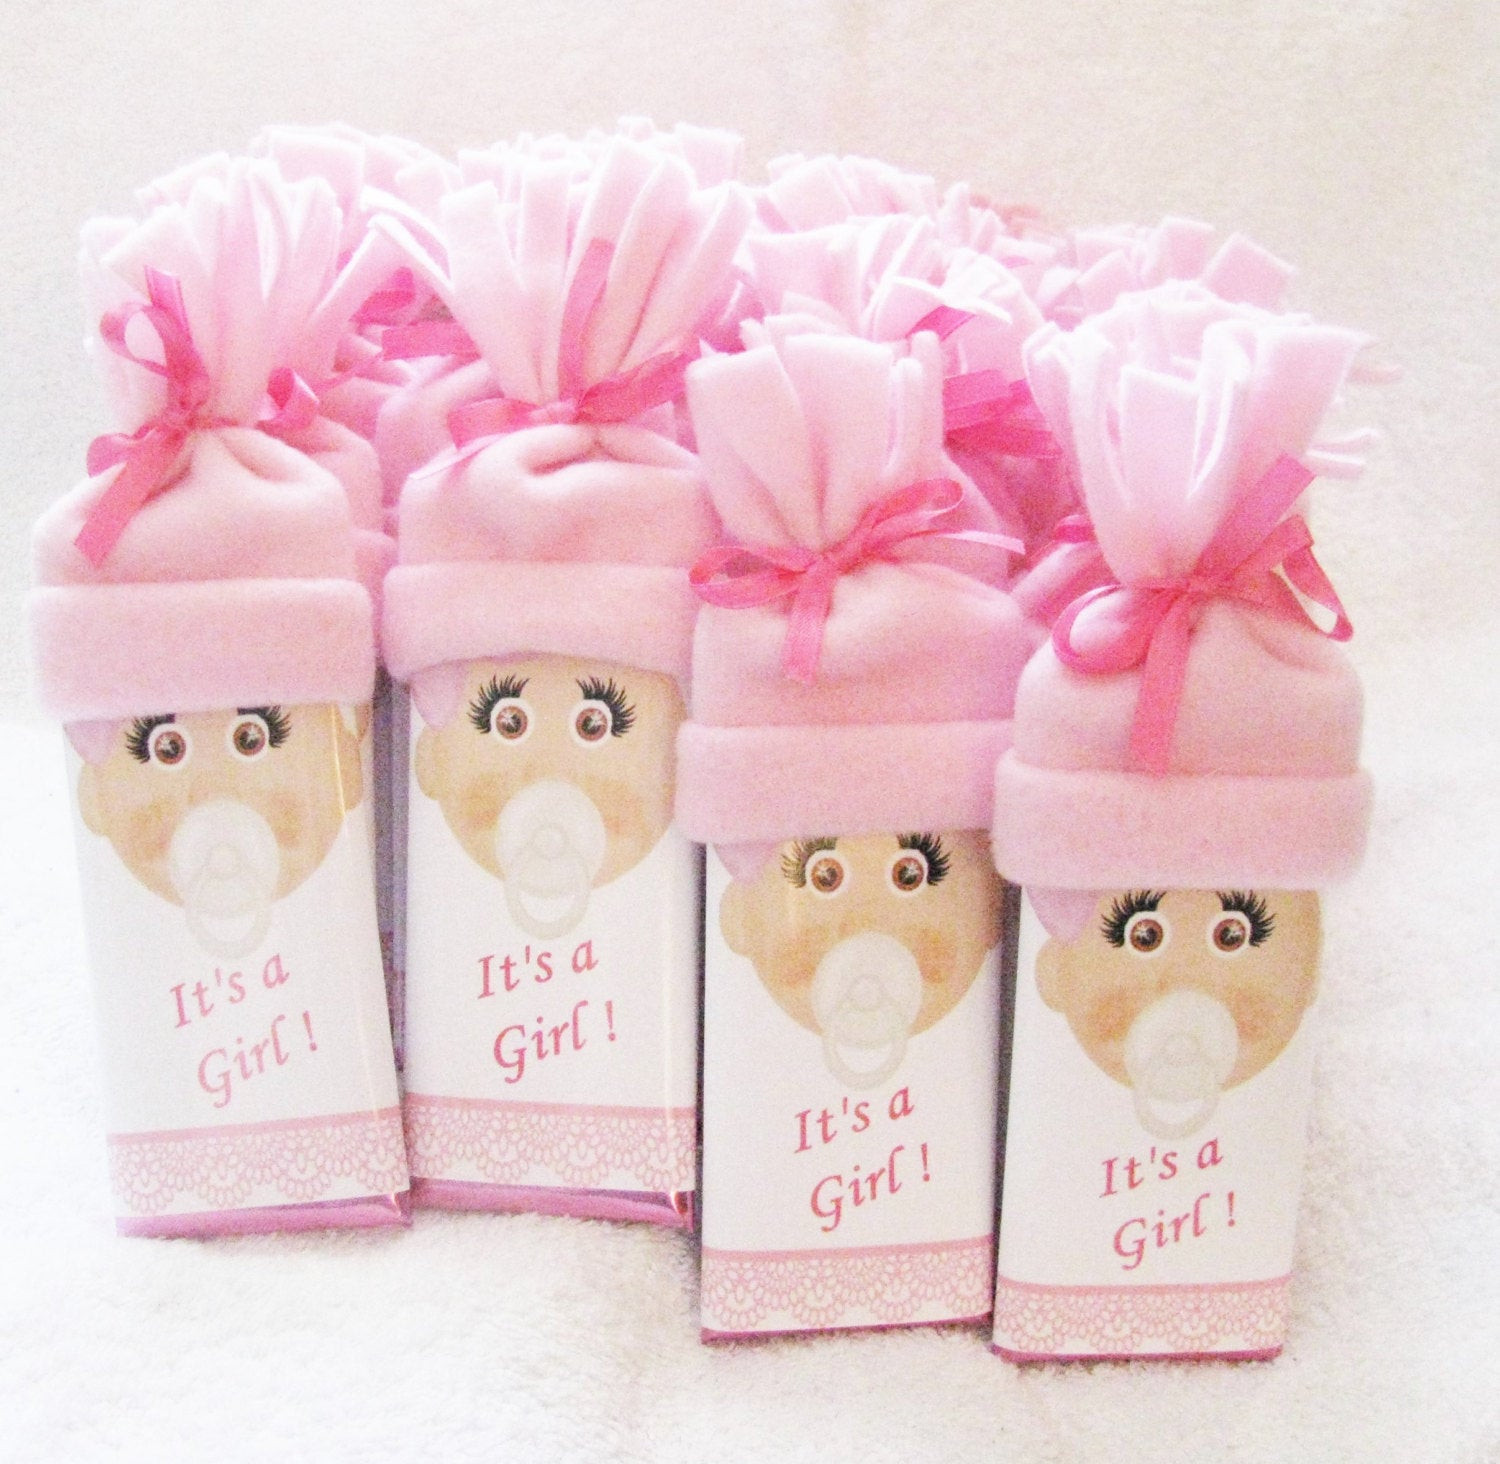 Personal Baby Shower Gift Ideas
 Personalized Baby Shower Favor Baby Shower Favors Custom